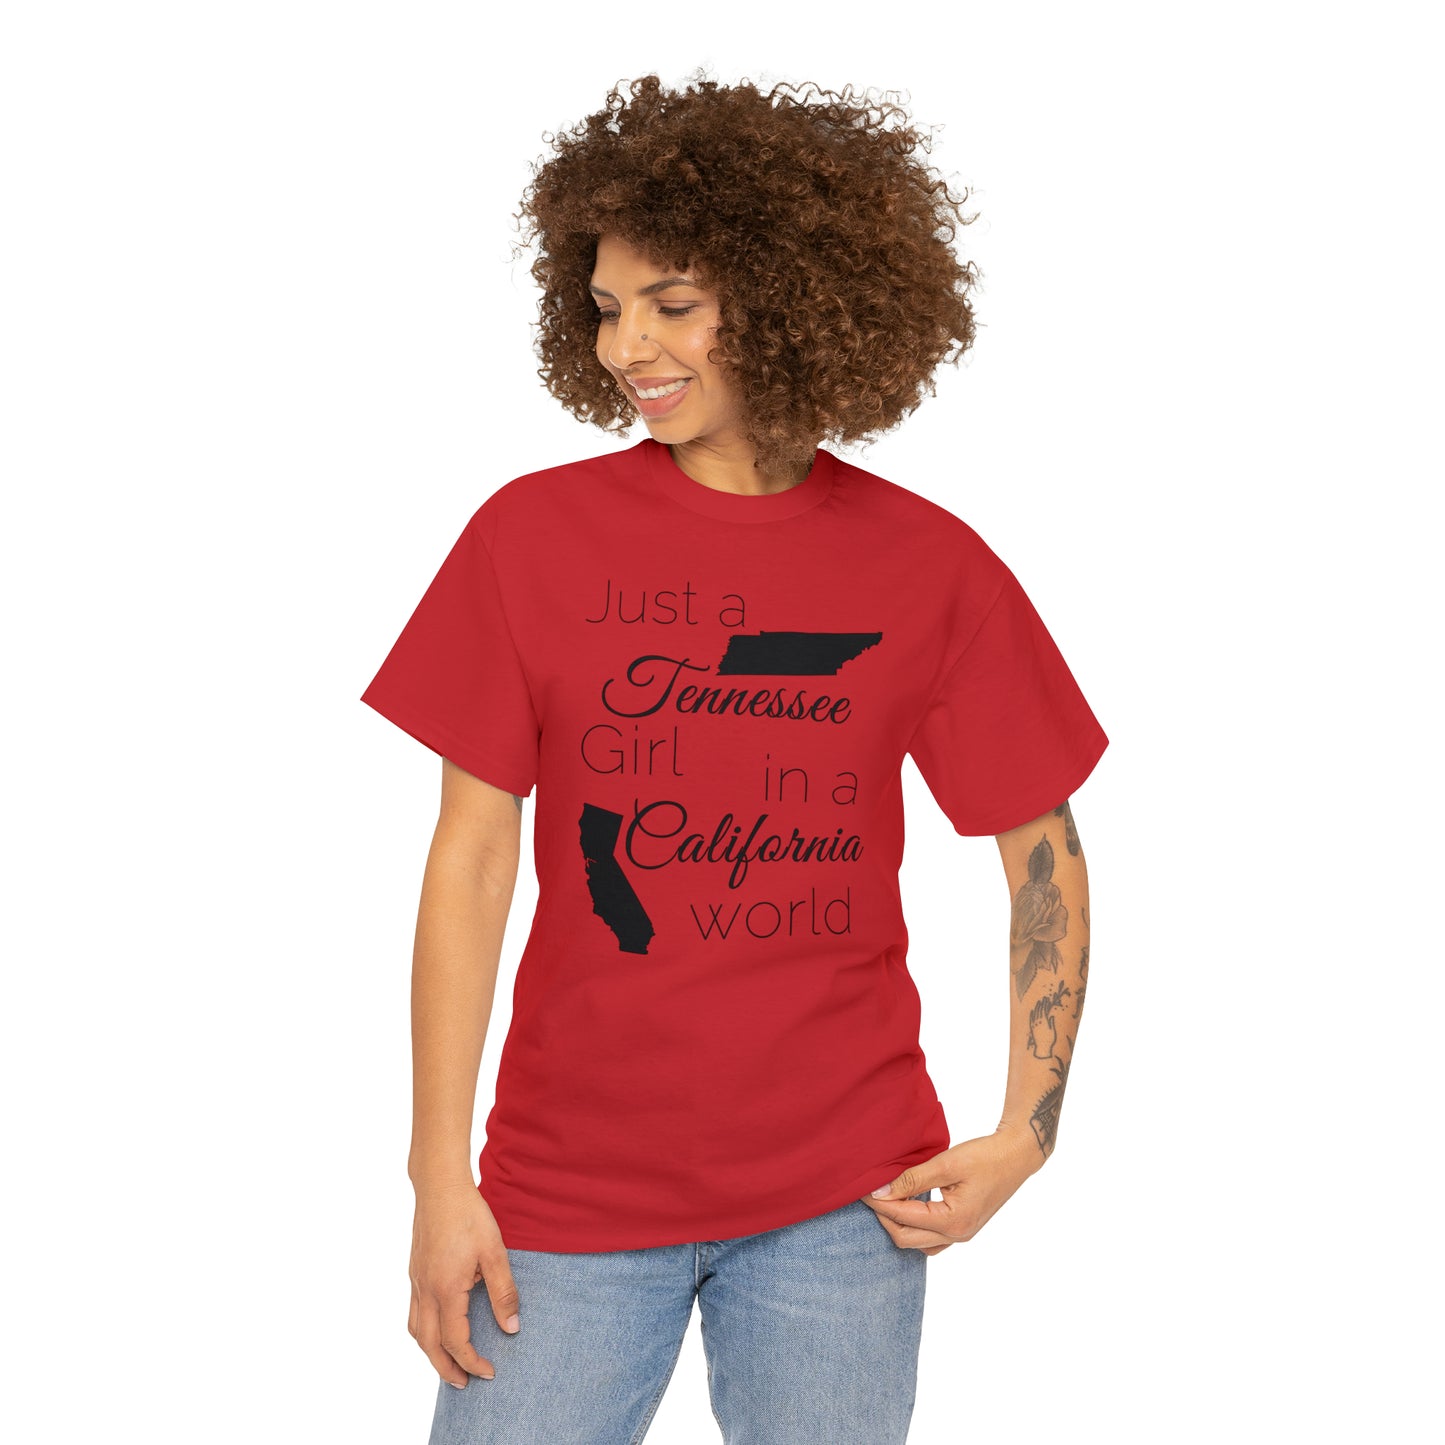 Just a Tennessee Girl in a California World Unisex Heavy Cotton Tee